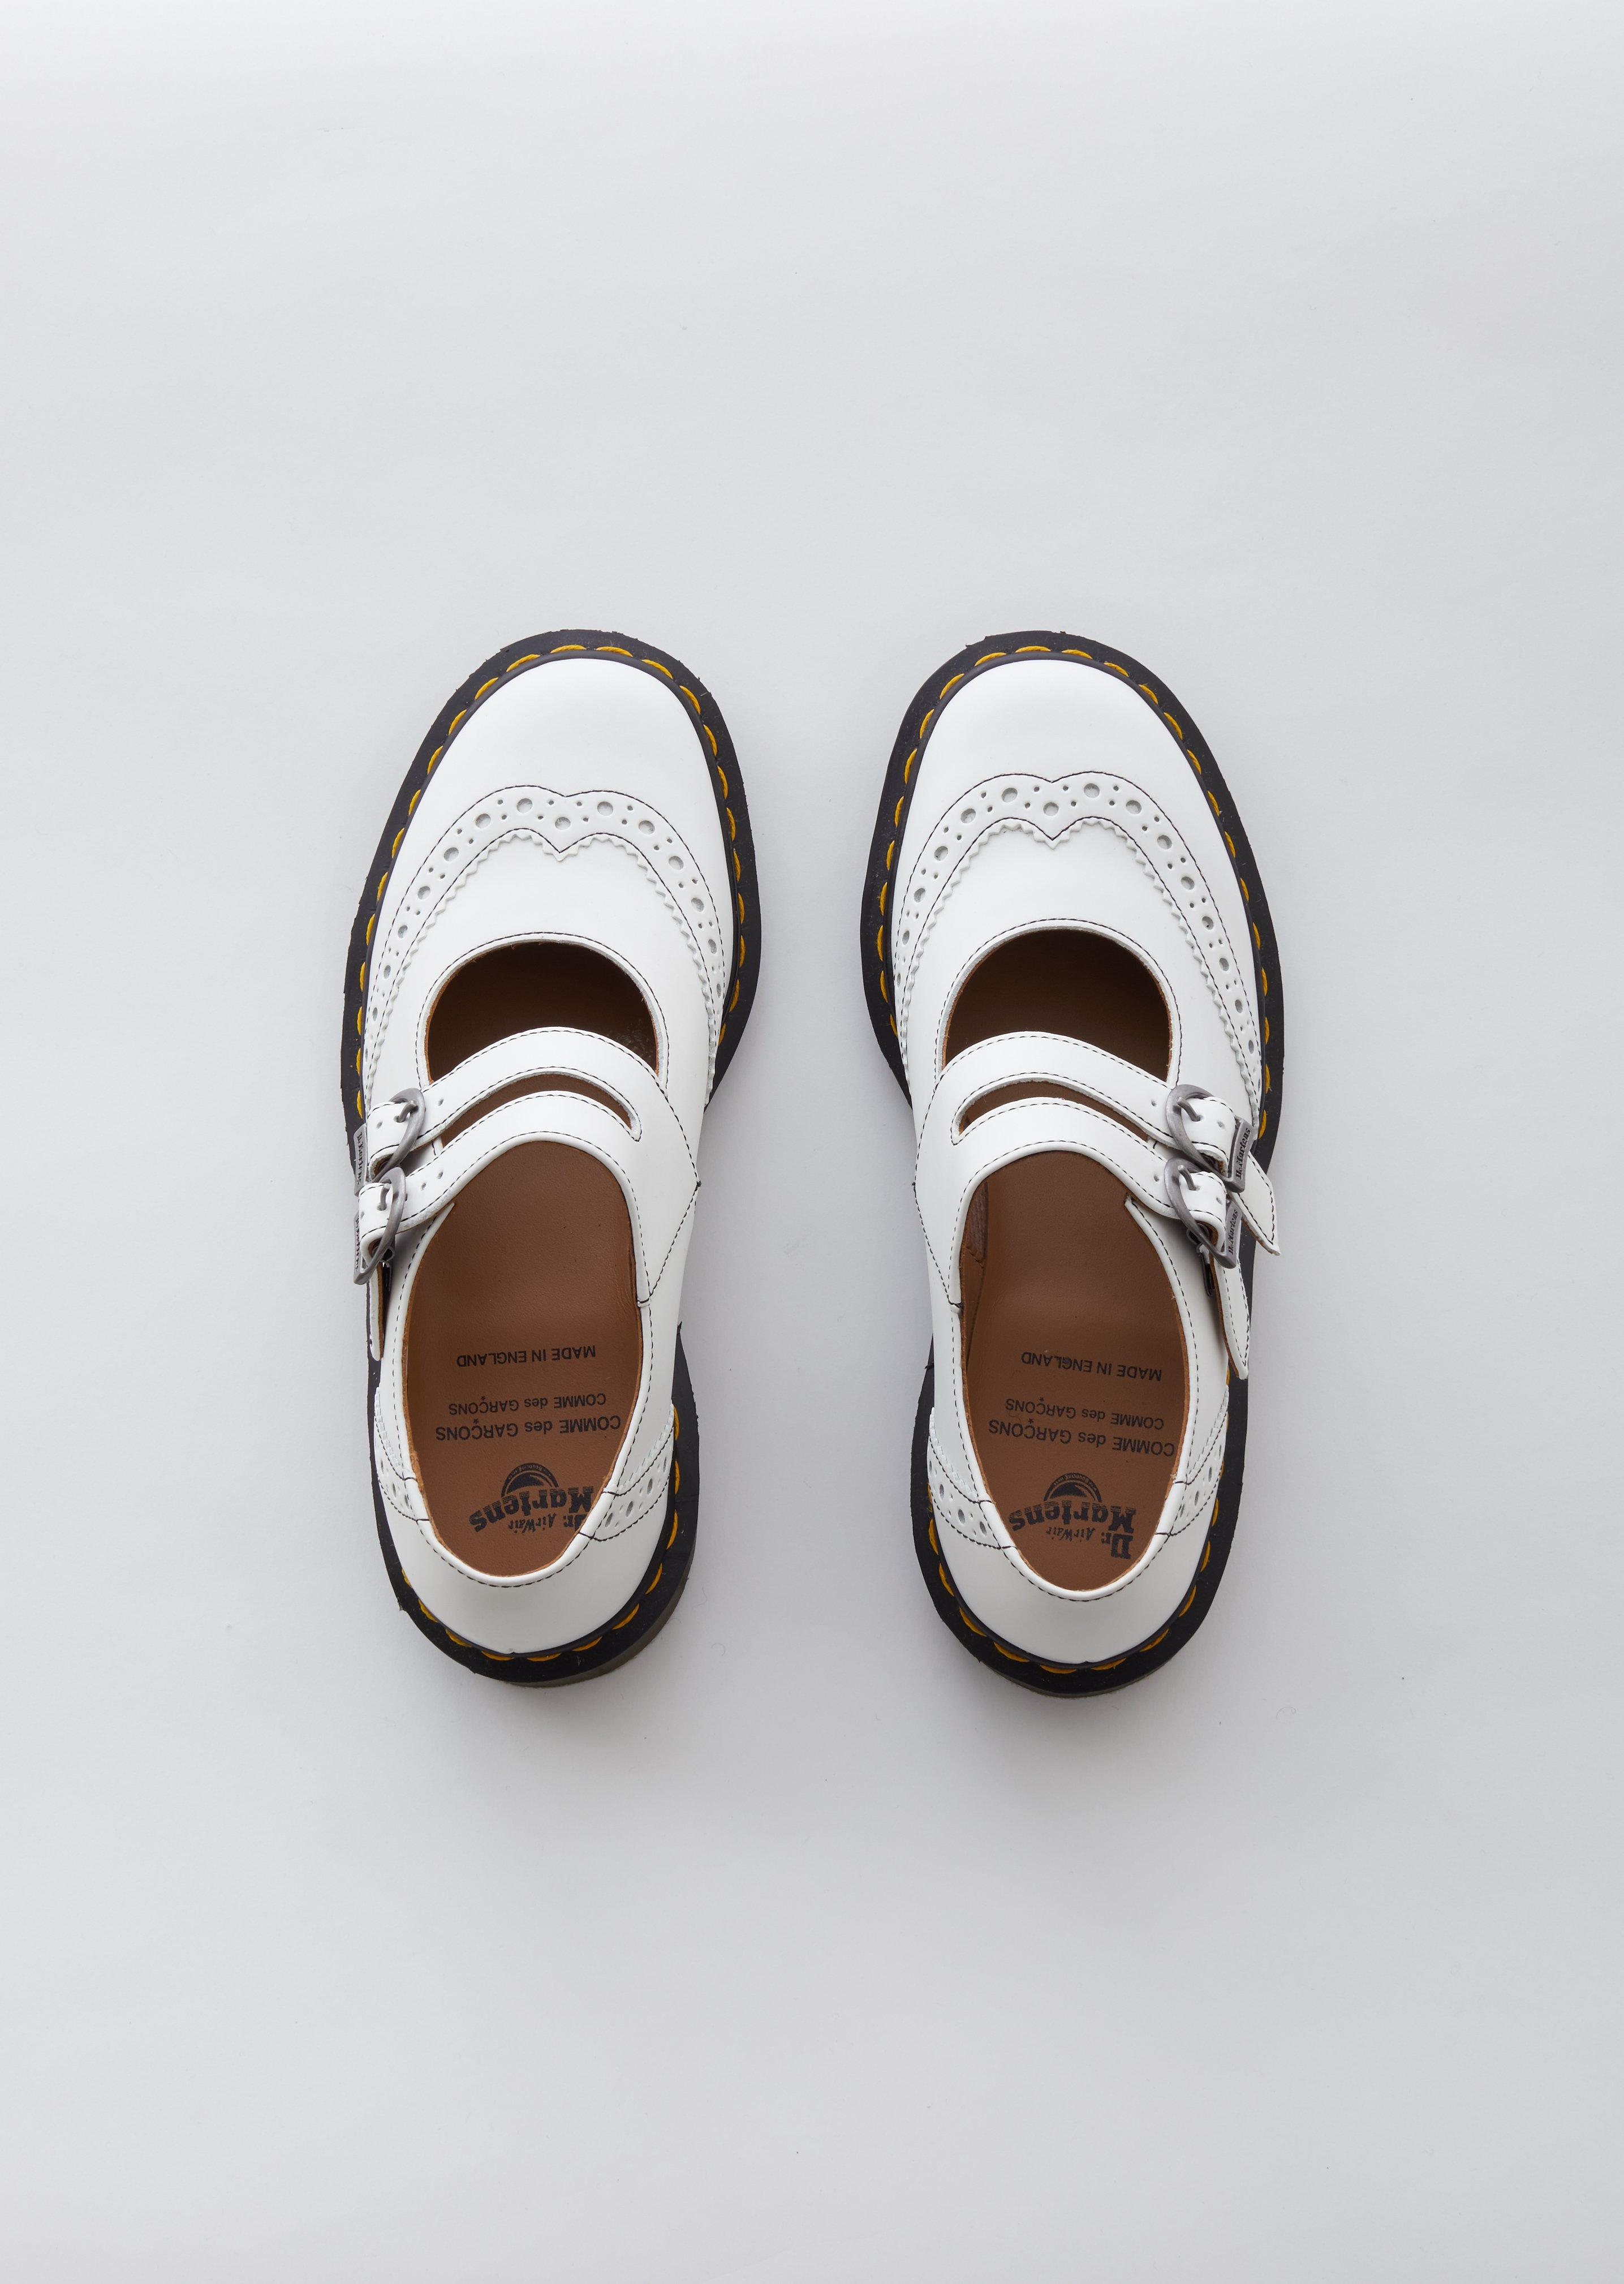 Comme des Garçons Leather Dr Martens Brogue Mary Jane Shoes in White | Lyst